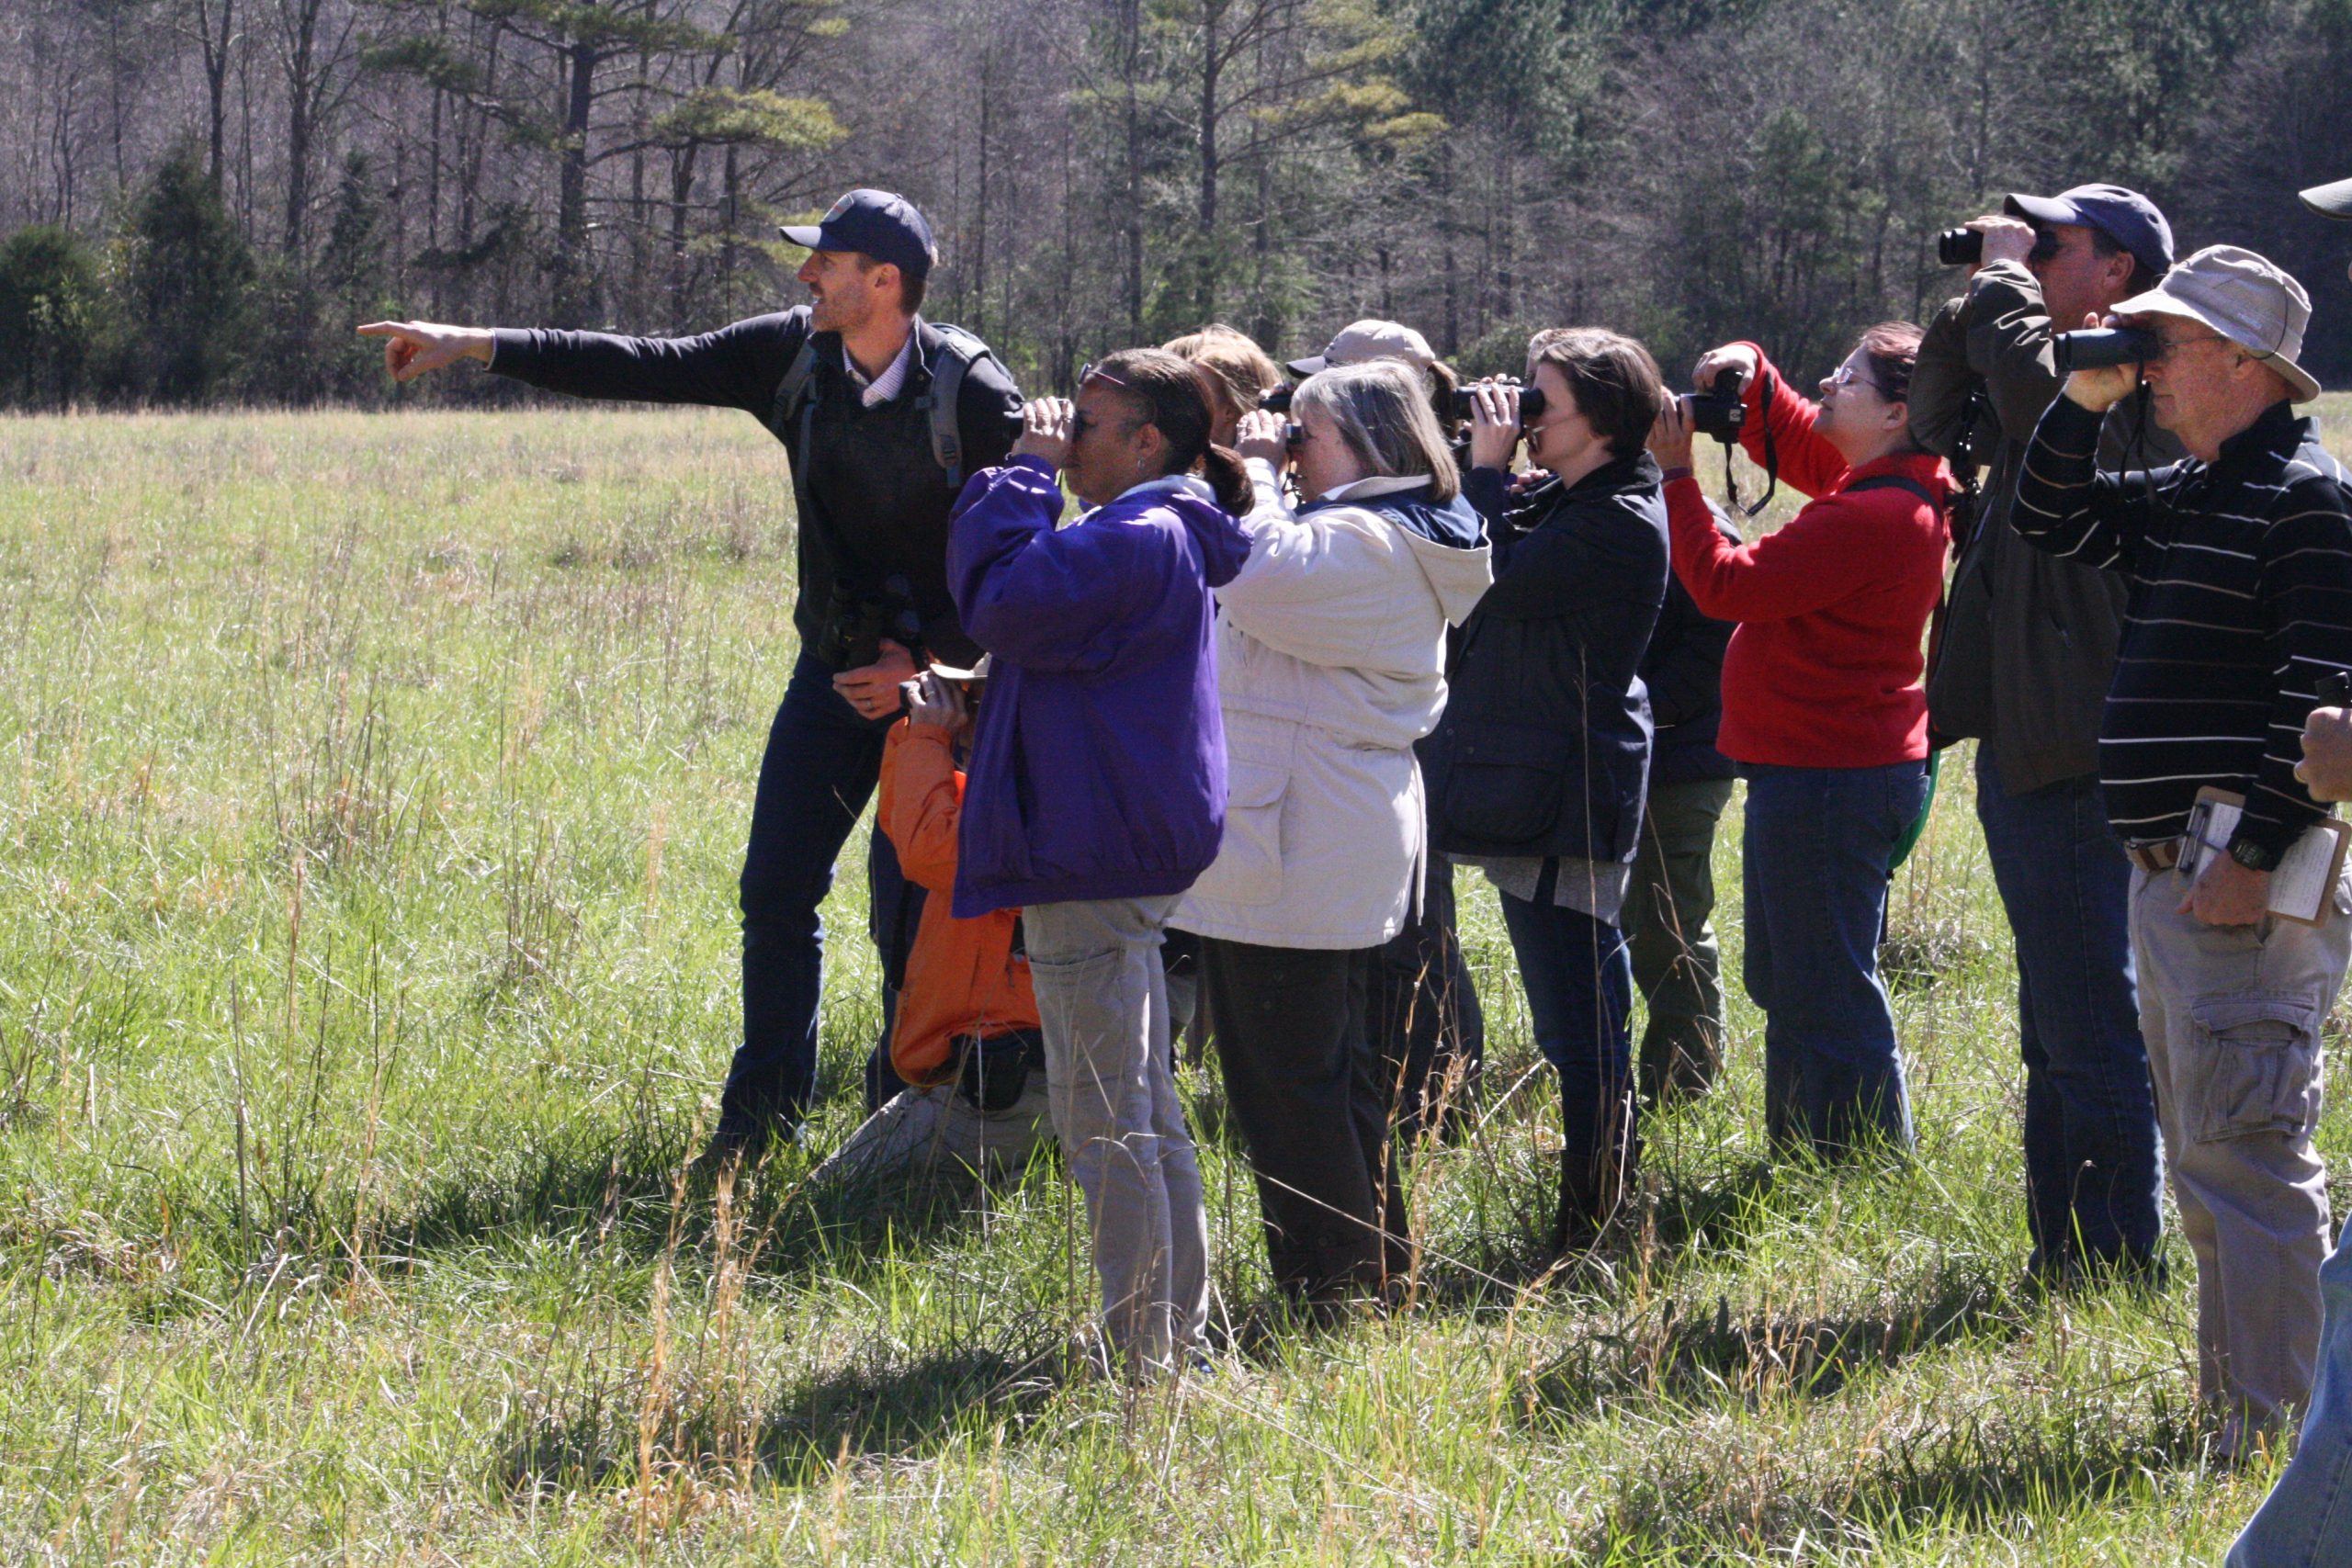 Jay Keck, SCWF’s habitat education manager, teaches a group of Midlands master naturalists about bird identification.
Photography courtesy of SCWF